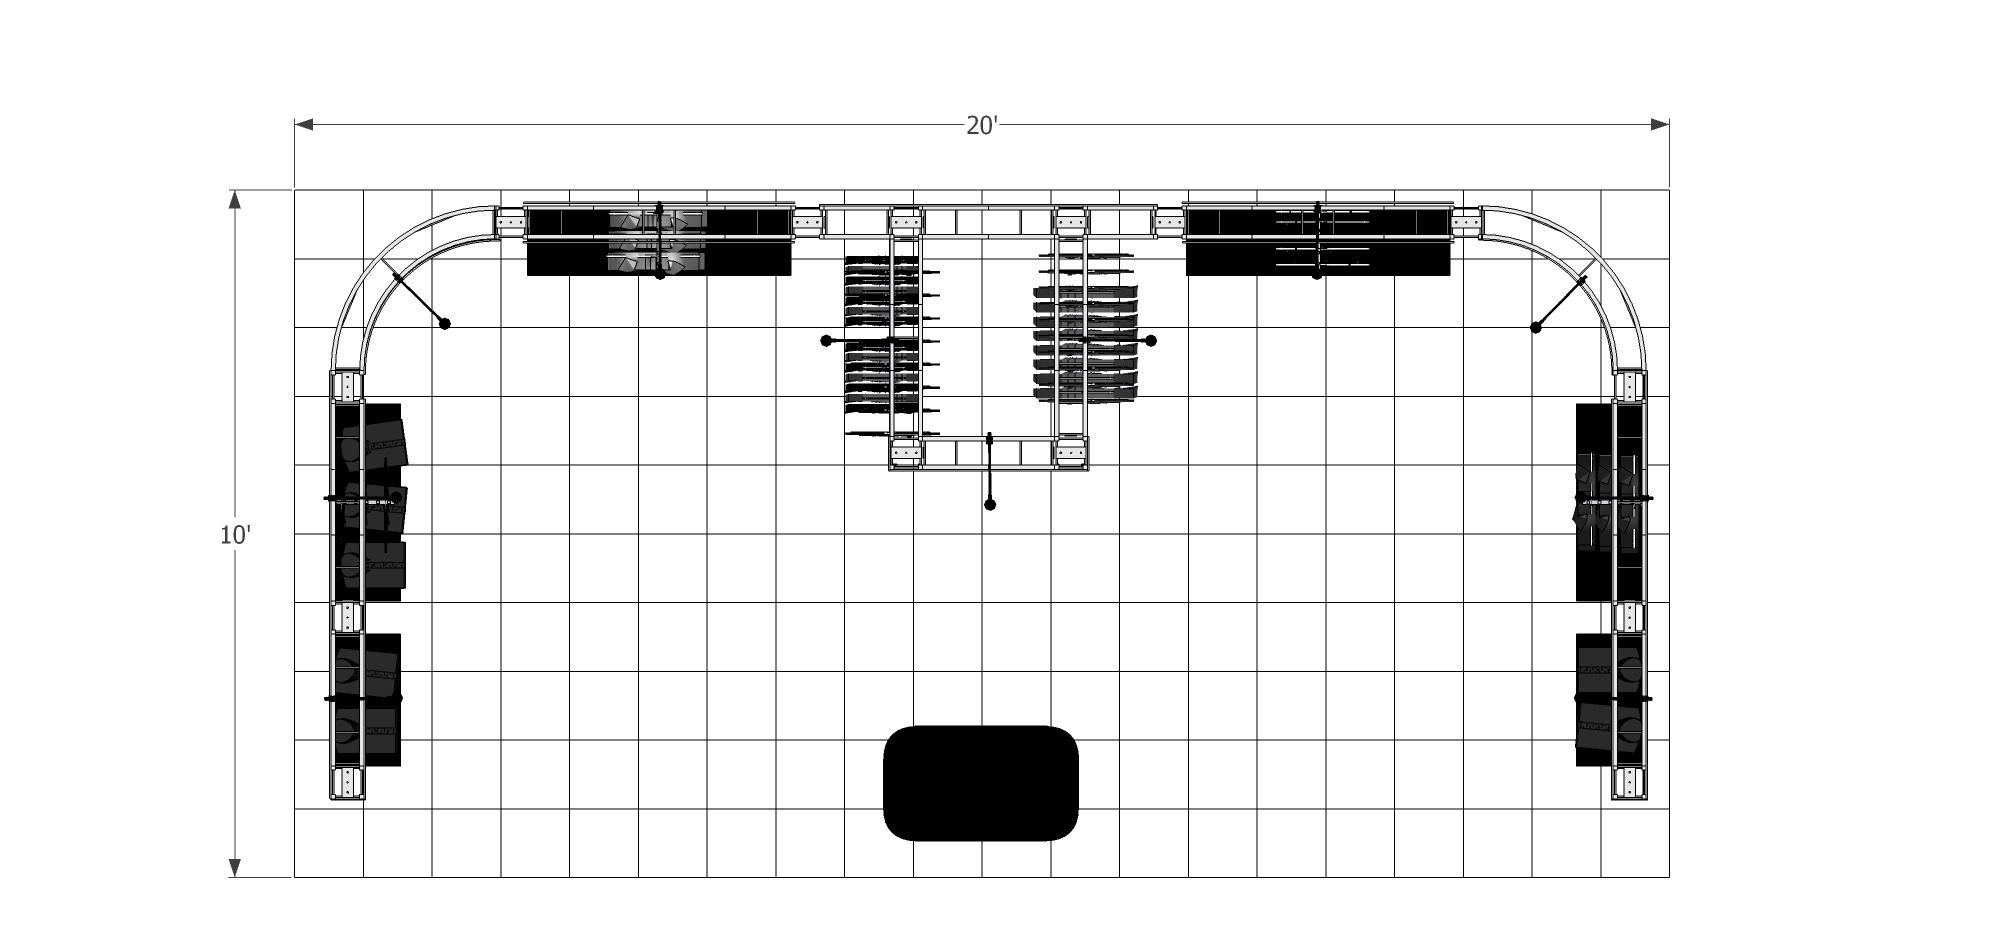 Clothing and Shelving trade show exhibit design SAL1020 Floor Plan